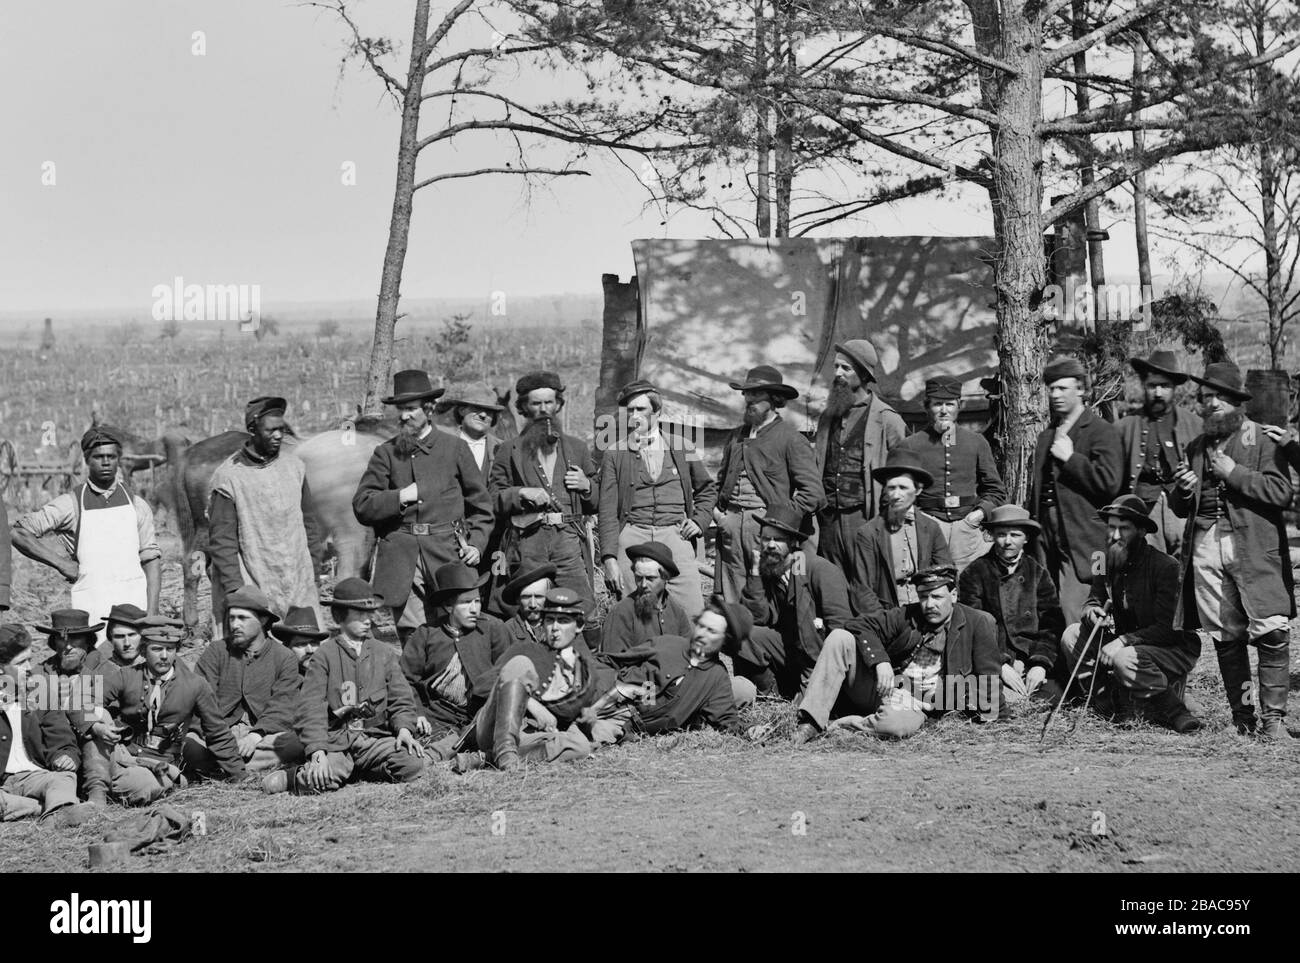 Union scouts and guides of the Union Army of the Potomac, at winter quarters, Brandy Station, March 1864. These men were part of the Bureau of Military Intelligence, headed by Gen. George Sharpe. The men wear a variety of clothing to fade in with the general population as they gather military information  (BSLOC 2019 2 149) Stock Photo